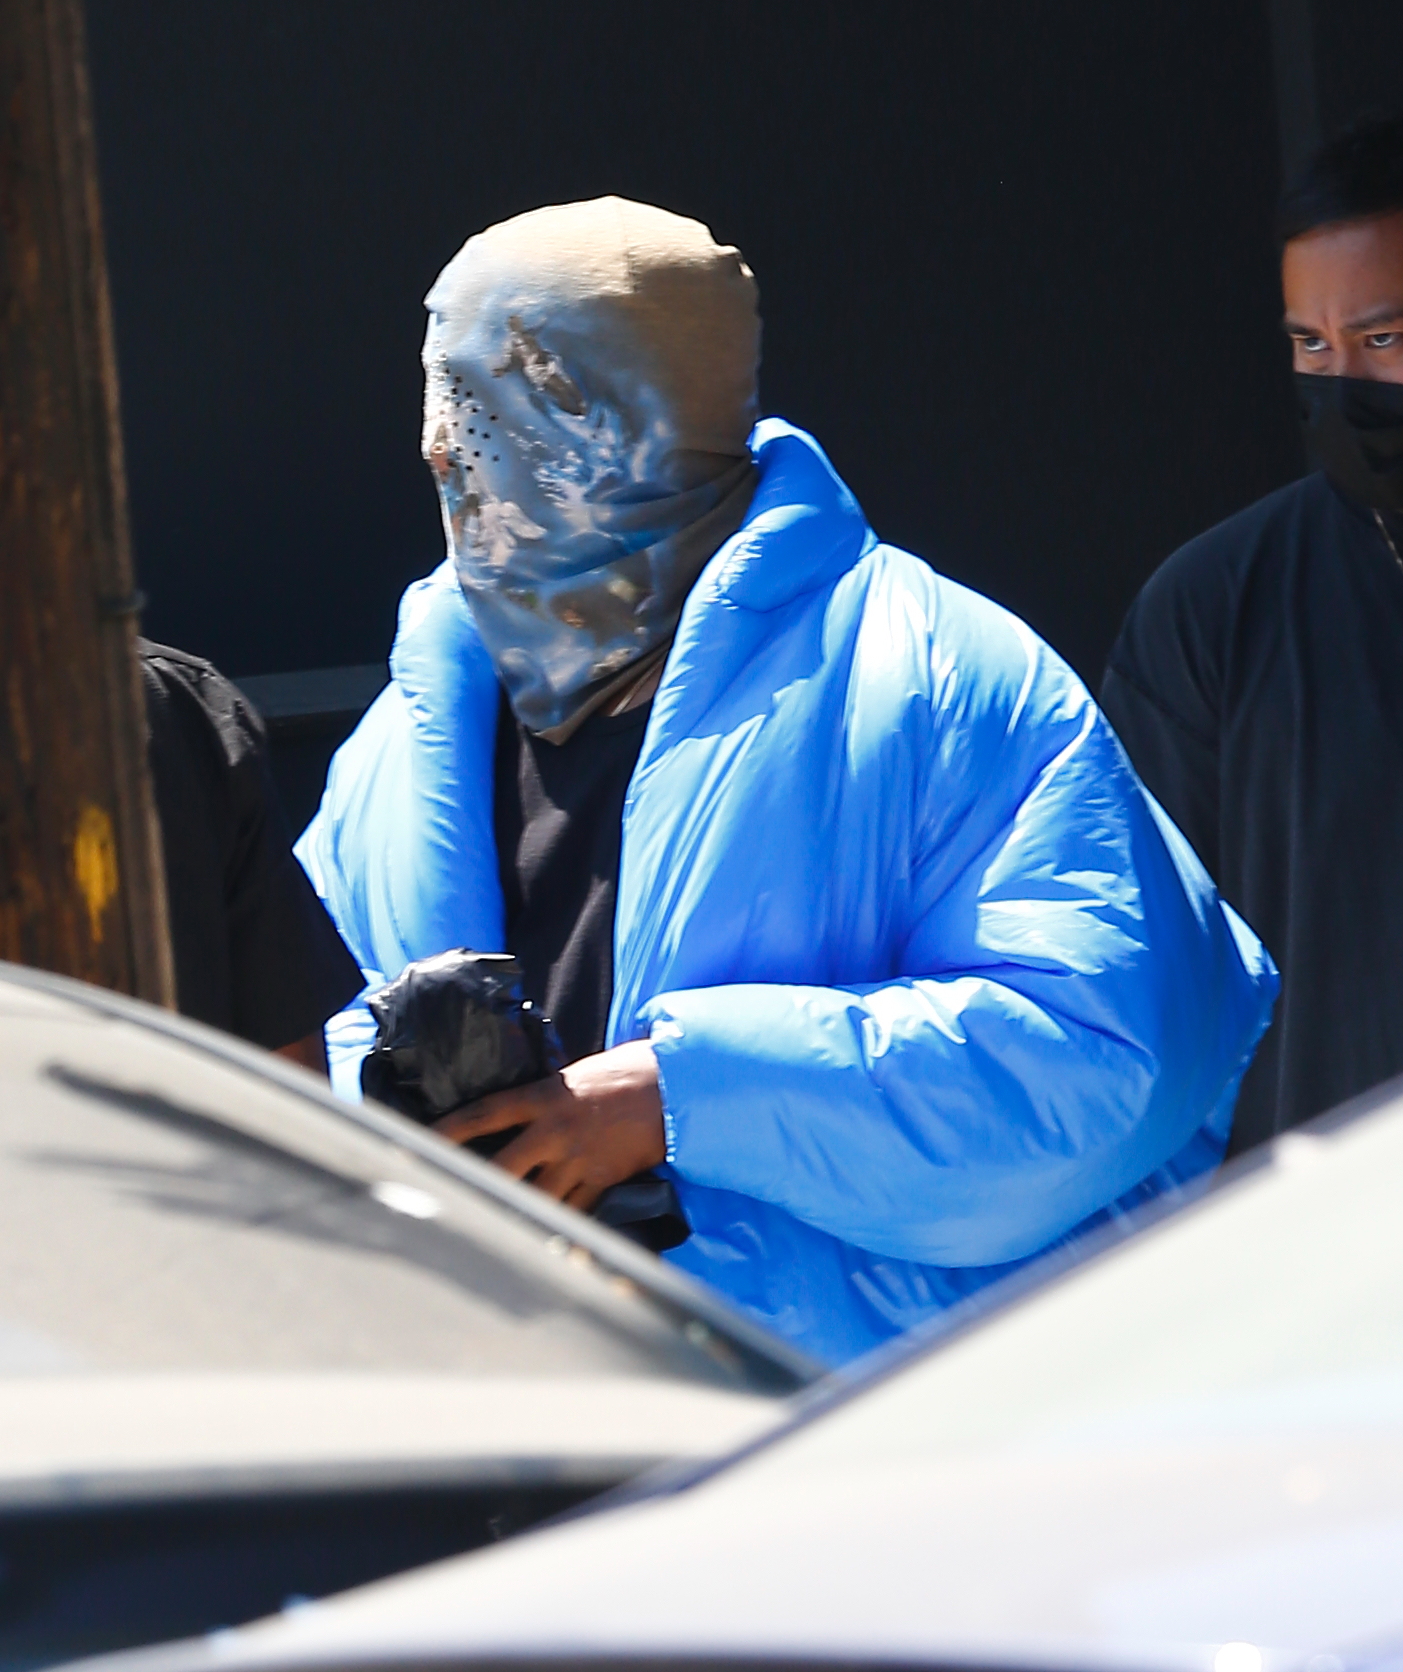 The rapper appeared to be trying to keep a low profile in his full face mask